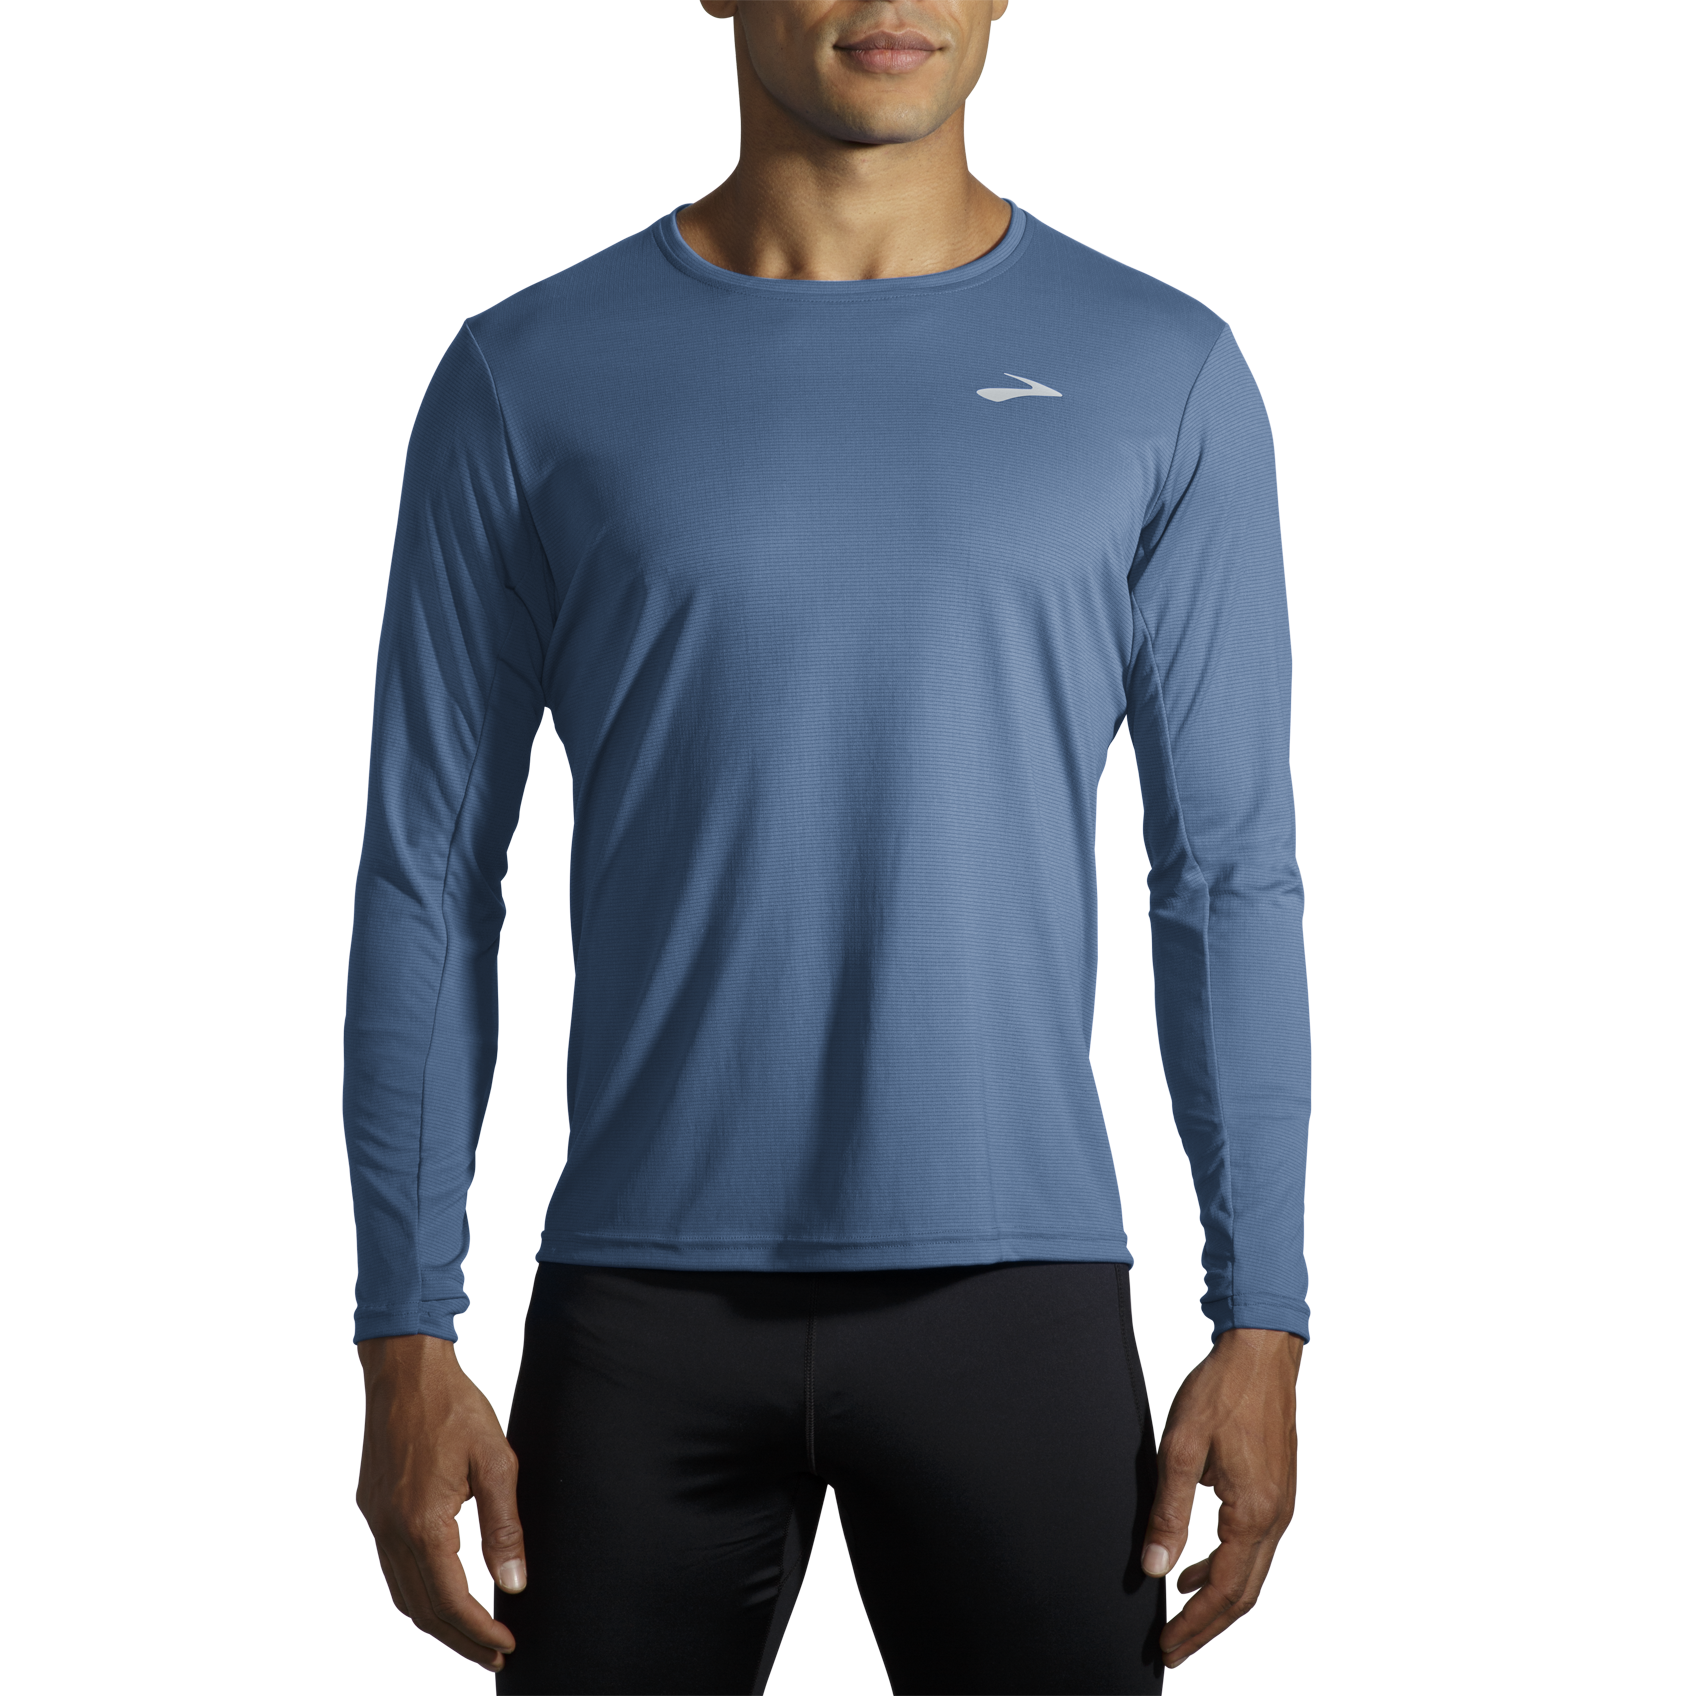 Higher State Mens Crew Neck Long Sleeve Running Top Blue Sports Breathable 